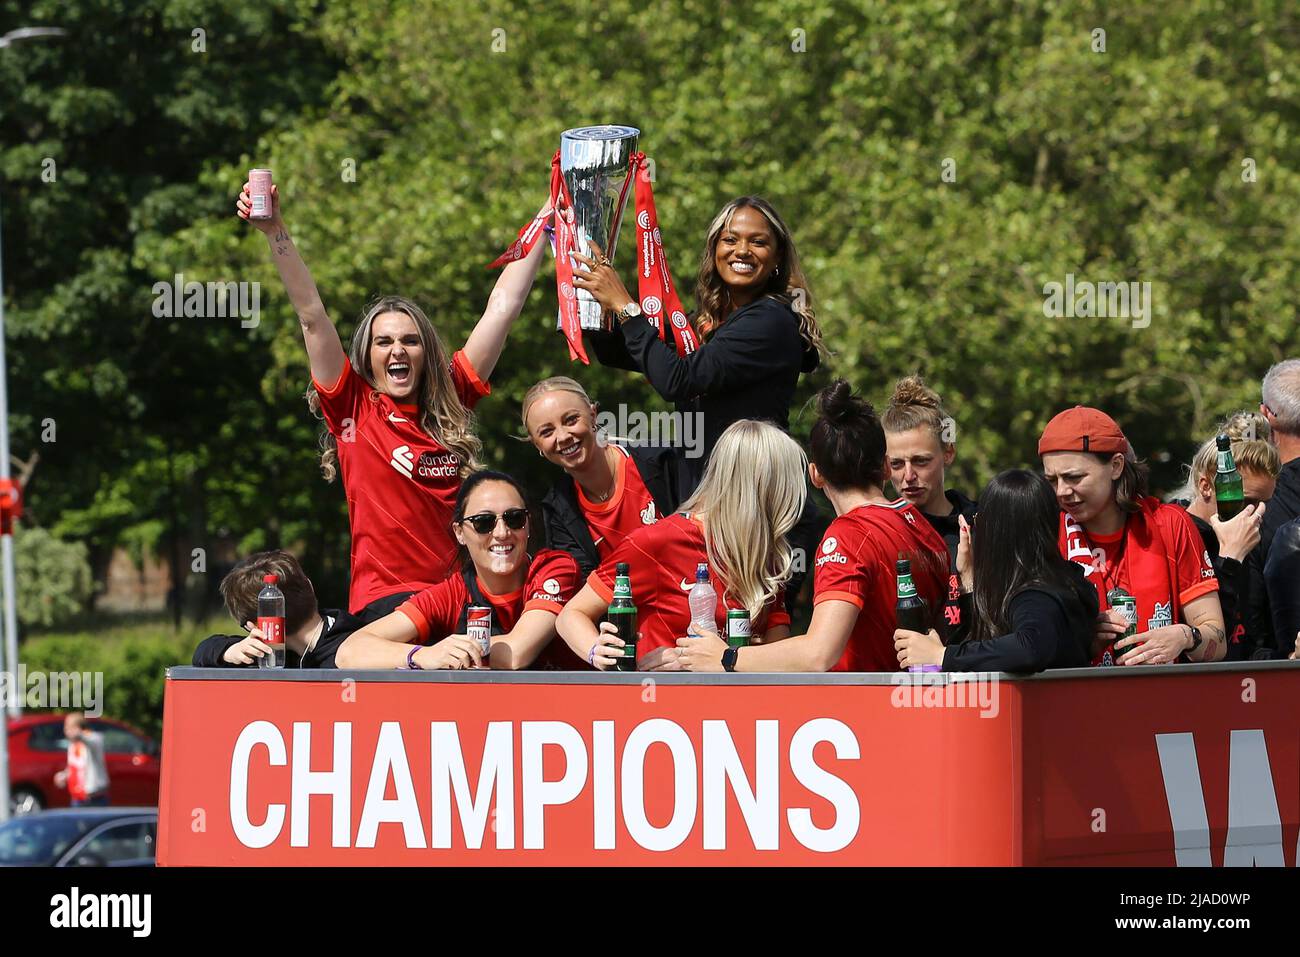 Liverpool, UK. 29th May, 2022. Liverpool FC Women on their team bus. Liverpool  Football Club victory parade in Liverpool on Sunday 29th May 2022. Liverpool  FC celebrate this season's mens and women's